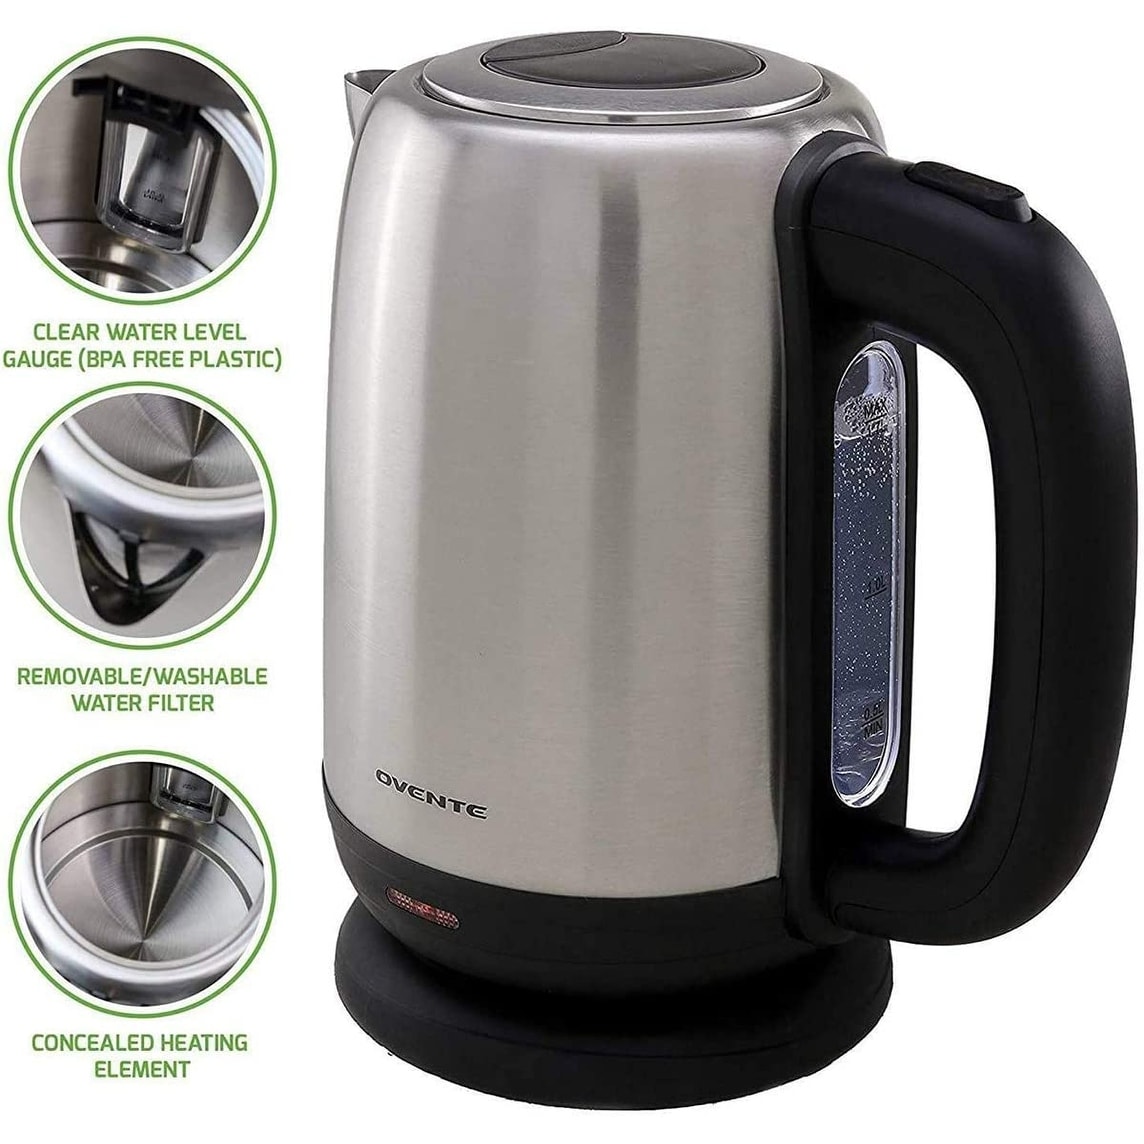 Ovente Electric Stainless Steel Hot Water Kettle 1.7 Liter with 5  Temperature Control & Concealed Heating Element, Silver - Bed Bath & Beyond  - 9796533